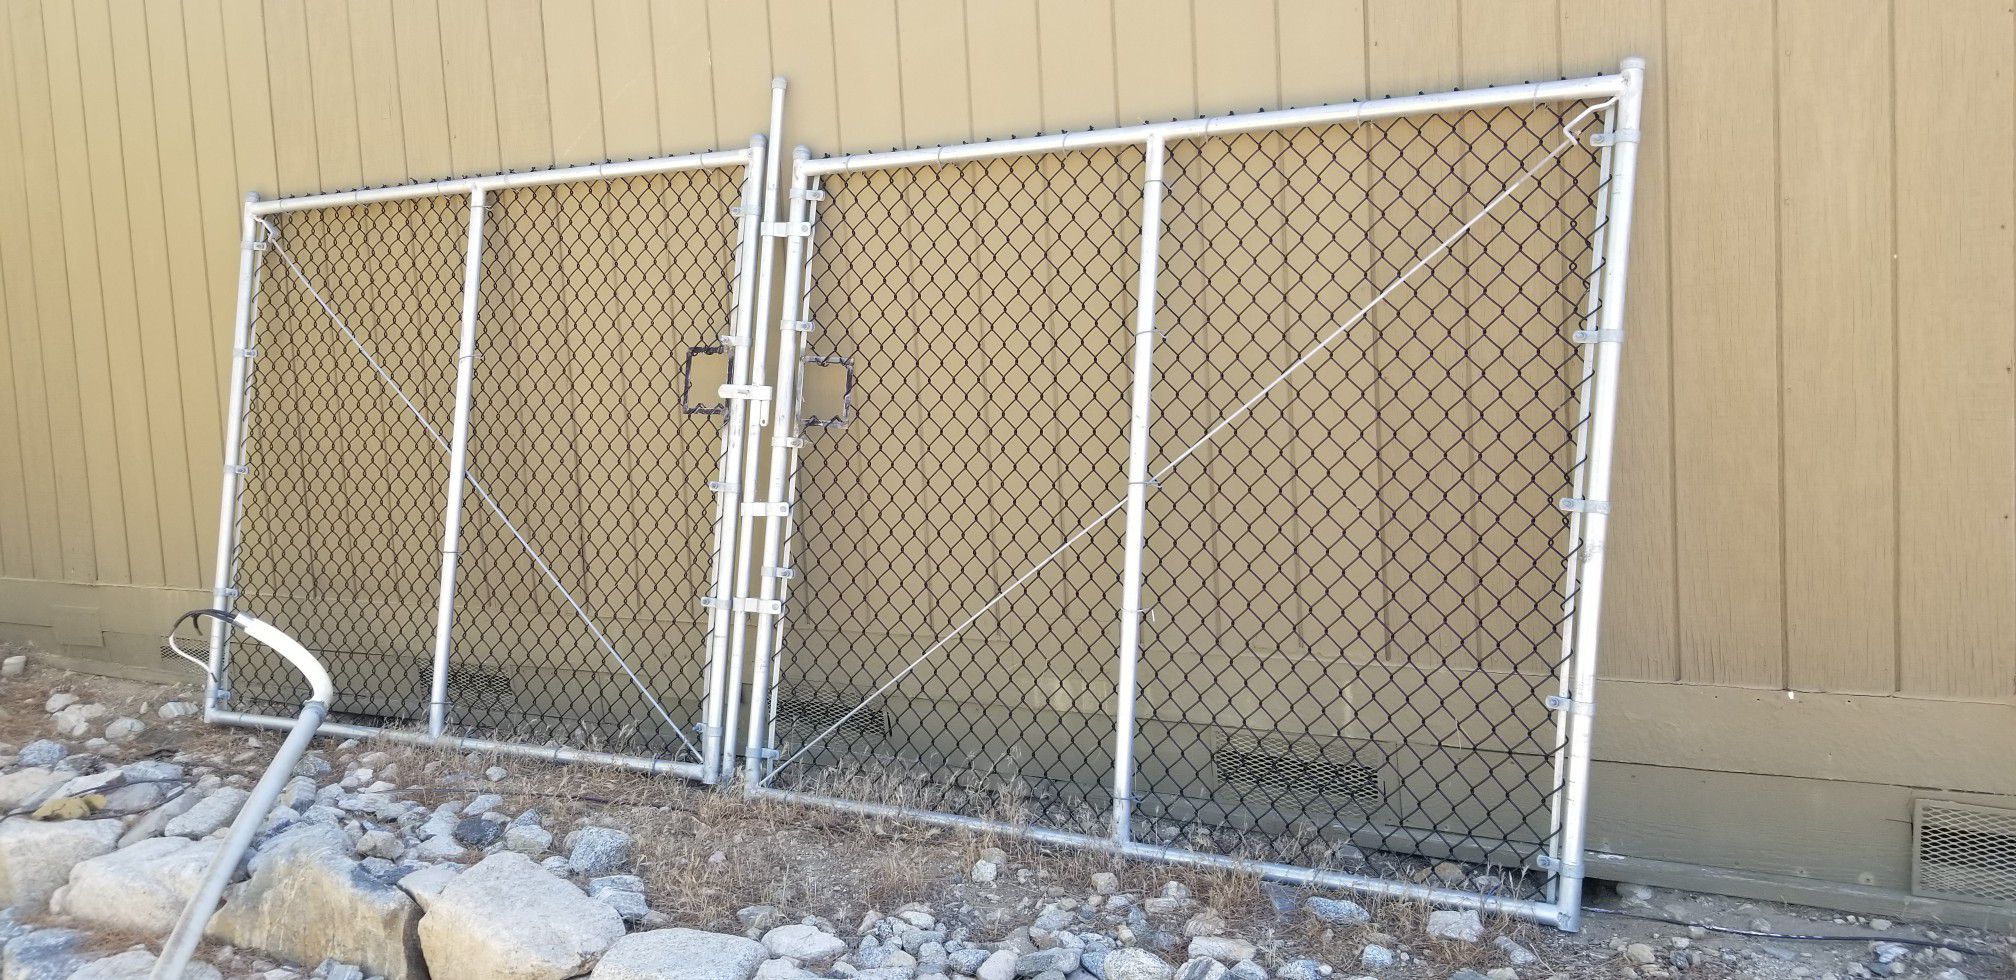 Pair of heavy duty chain link gates